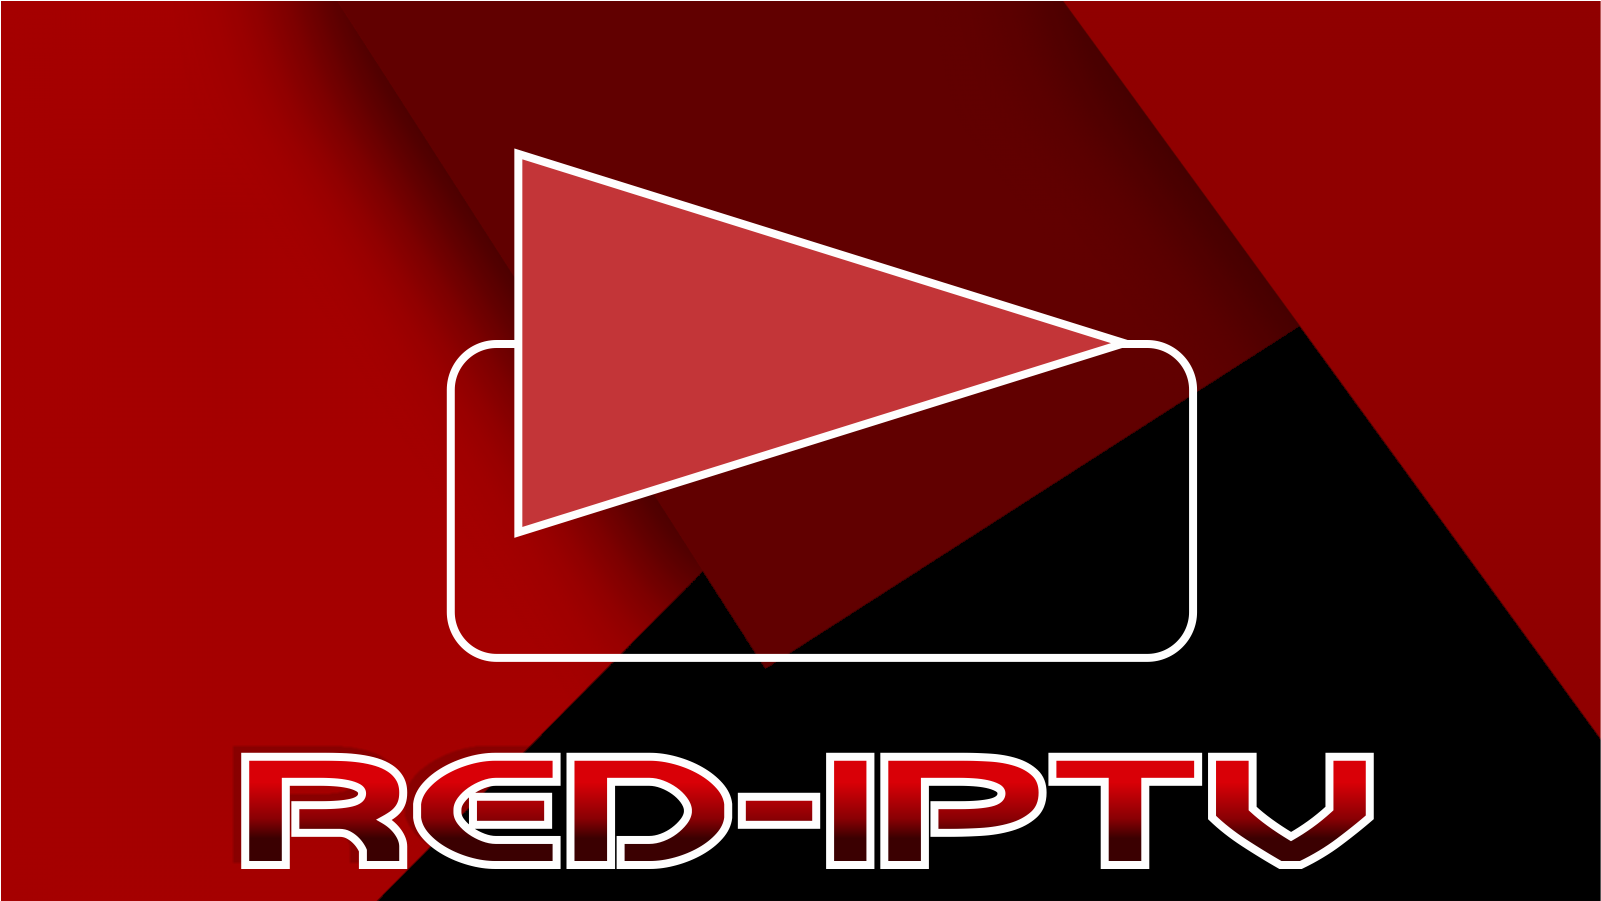 Https cub red download